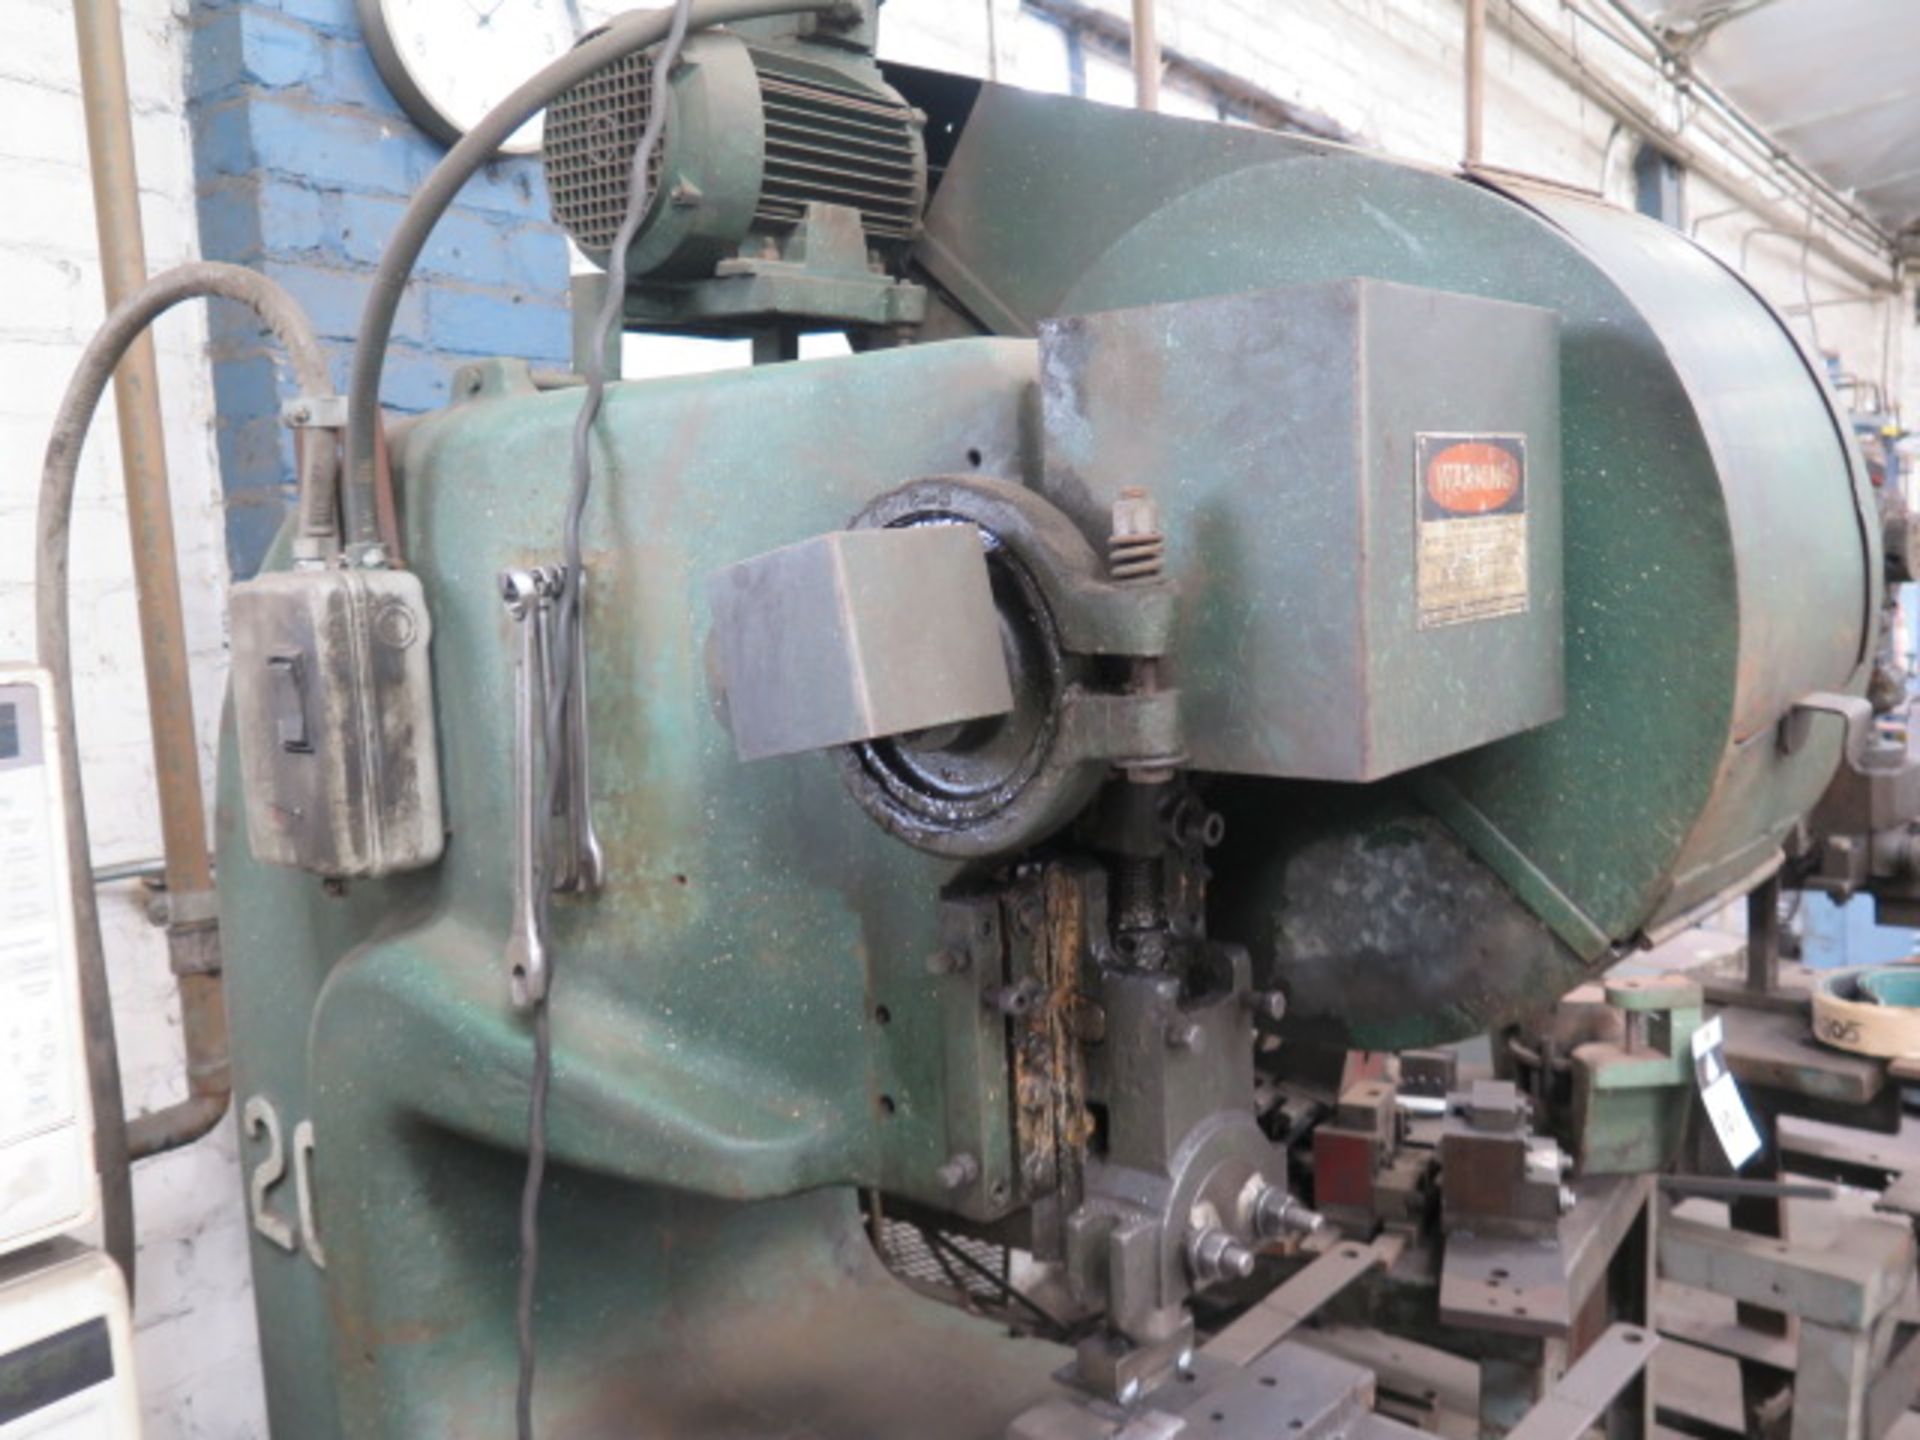 Rousselle 2G 15 Ton Straight Side Press s/n 20560 w/ 170 Strokes/Min, SOLD AS IS AND PARTS ONLY - Image 4 of 8